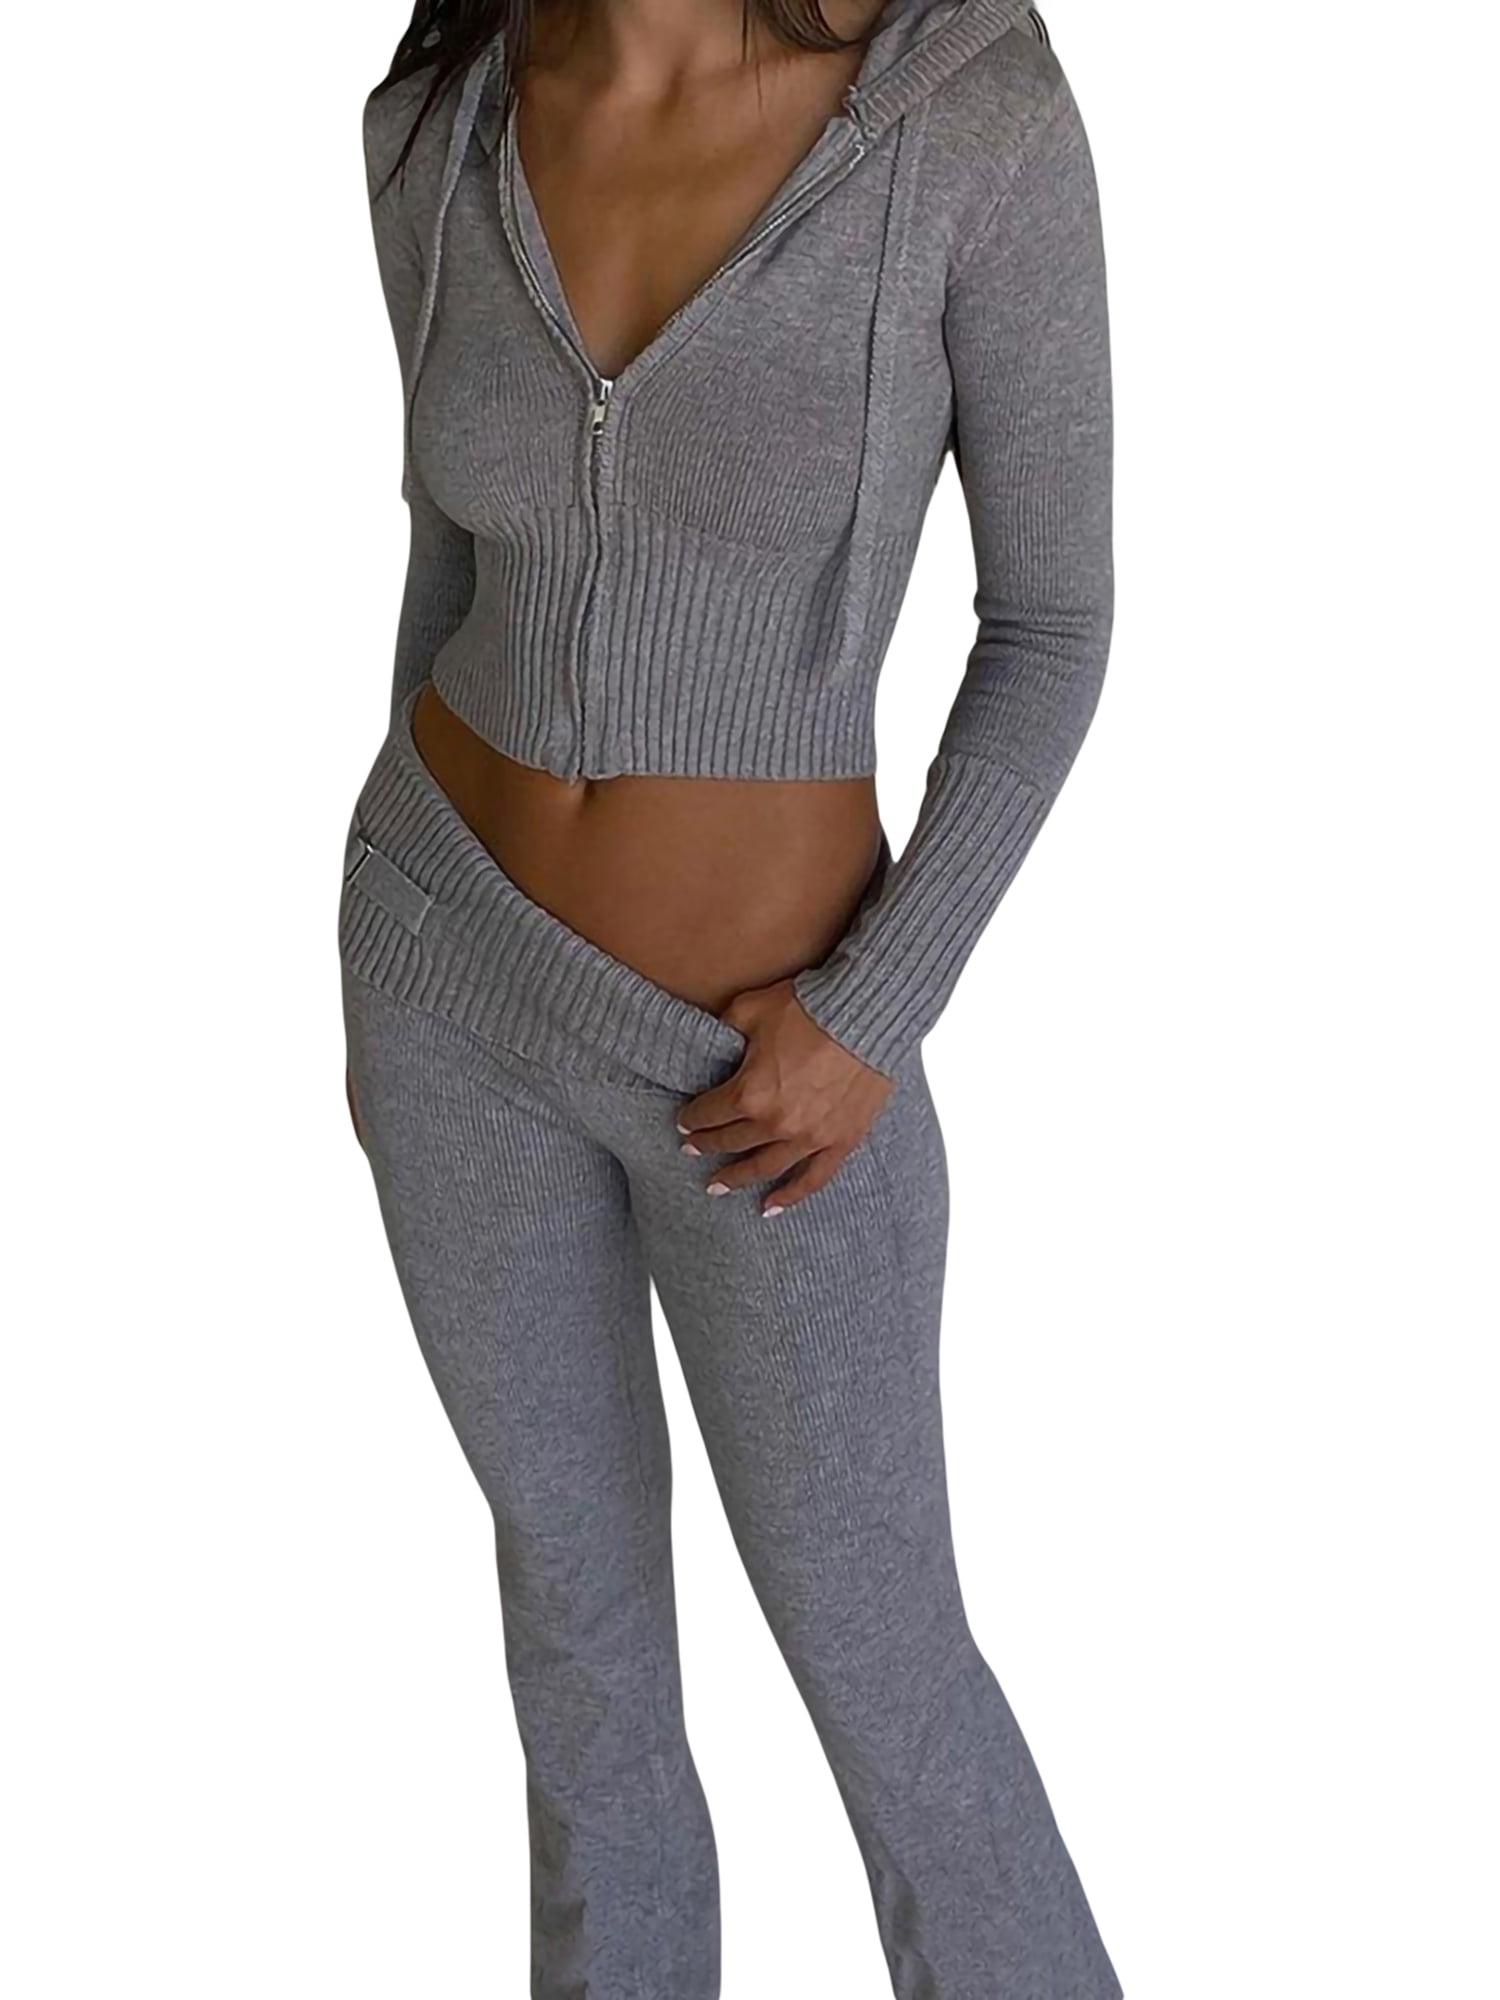 Reflective Womens Tight Tracksuit Set With Zipper Crop Top And Hollow Out  Two Piece Pants Set Designer Patchwork Jogging Outfit From Mant_shirt,  $35.24